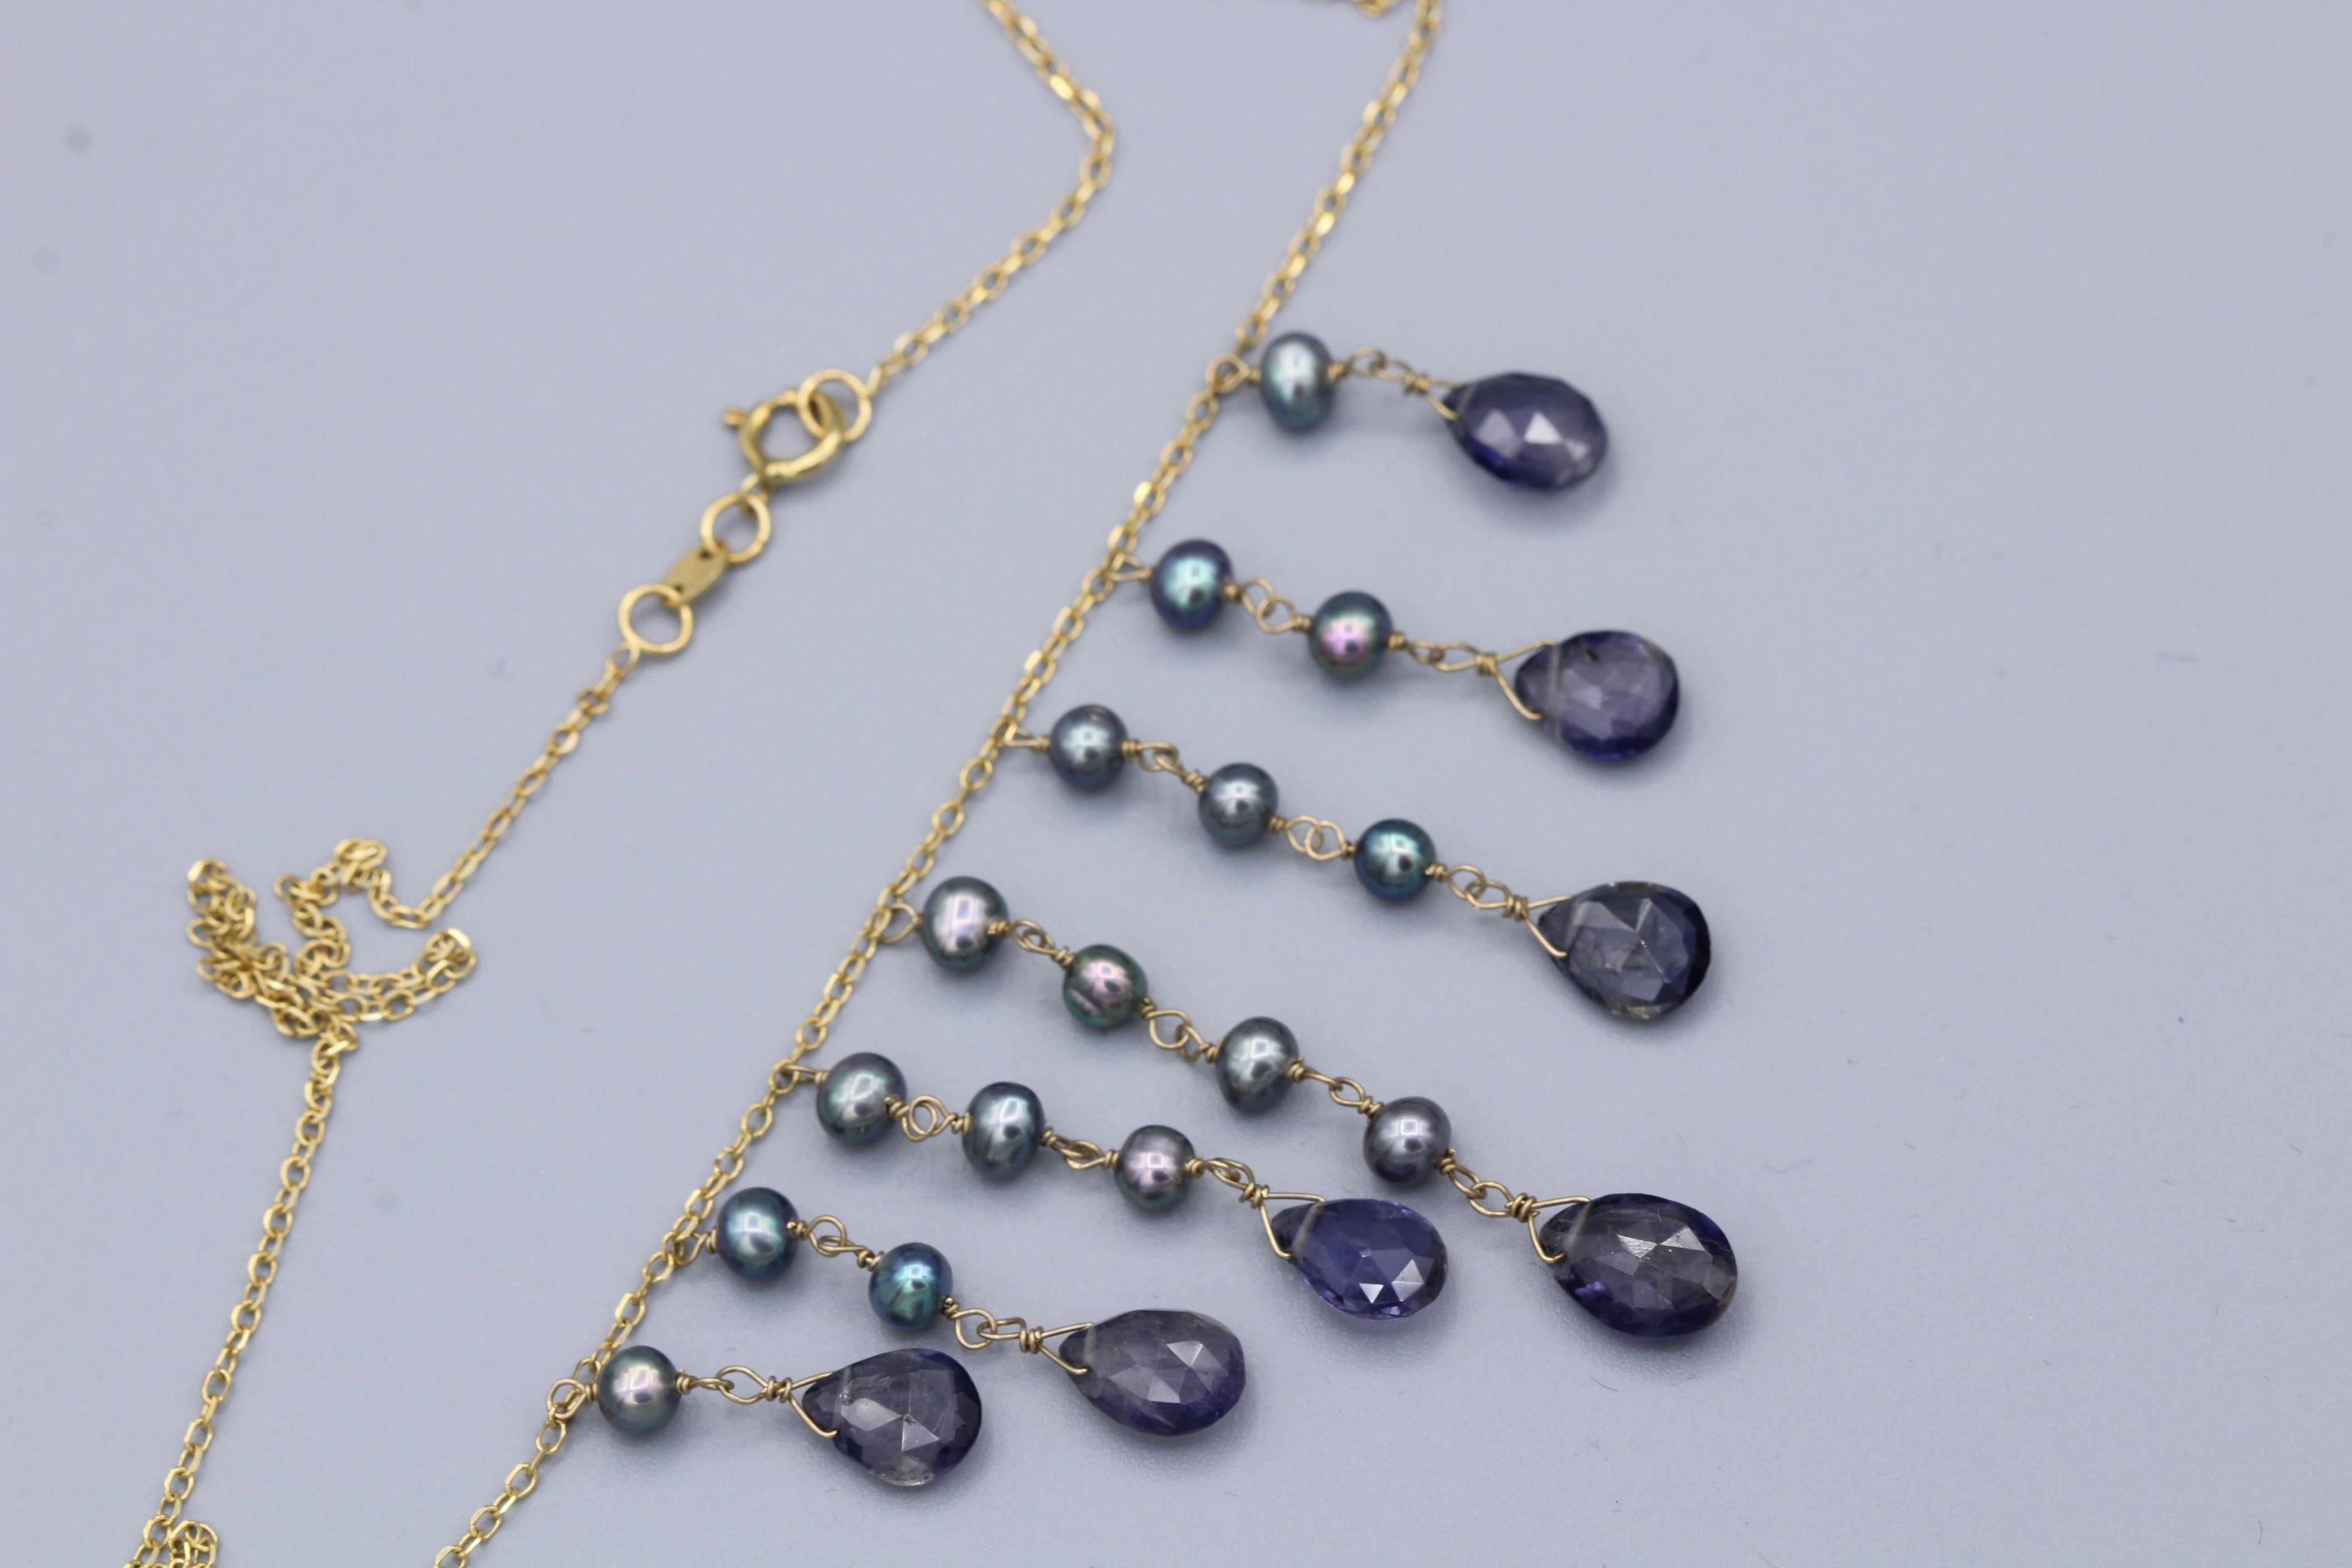 Dangling Necklace Blue Amethyst & Pearls Dangle Style 14 Karat Yellow Gold For Sale 1